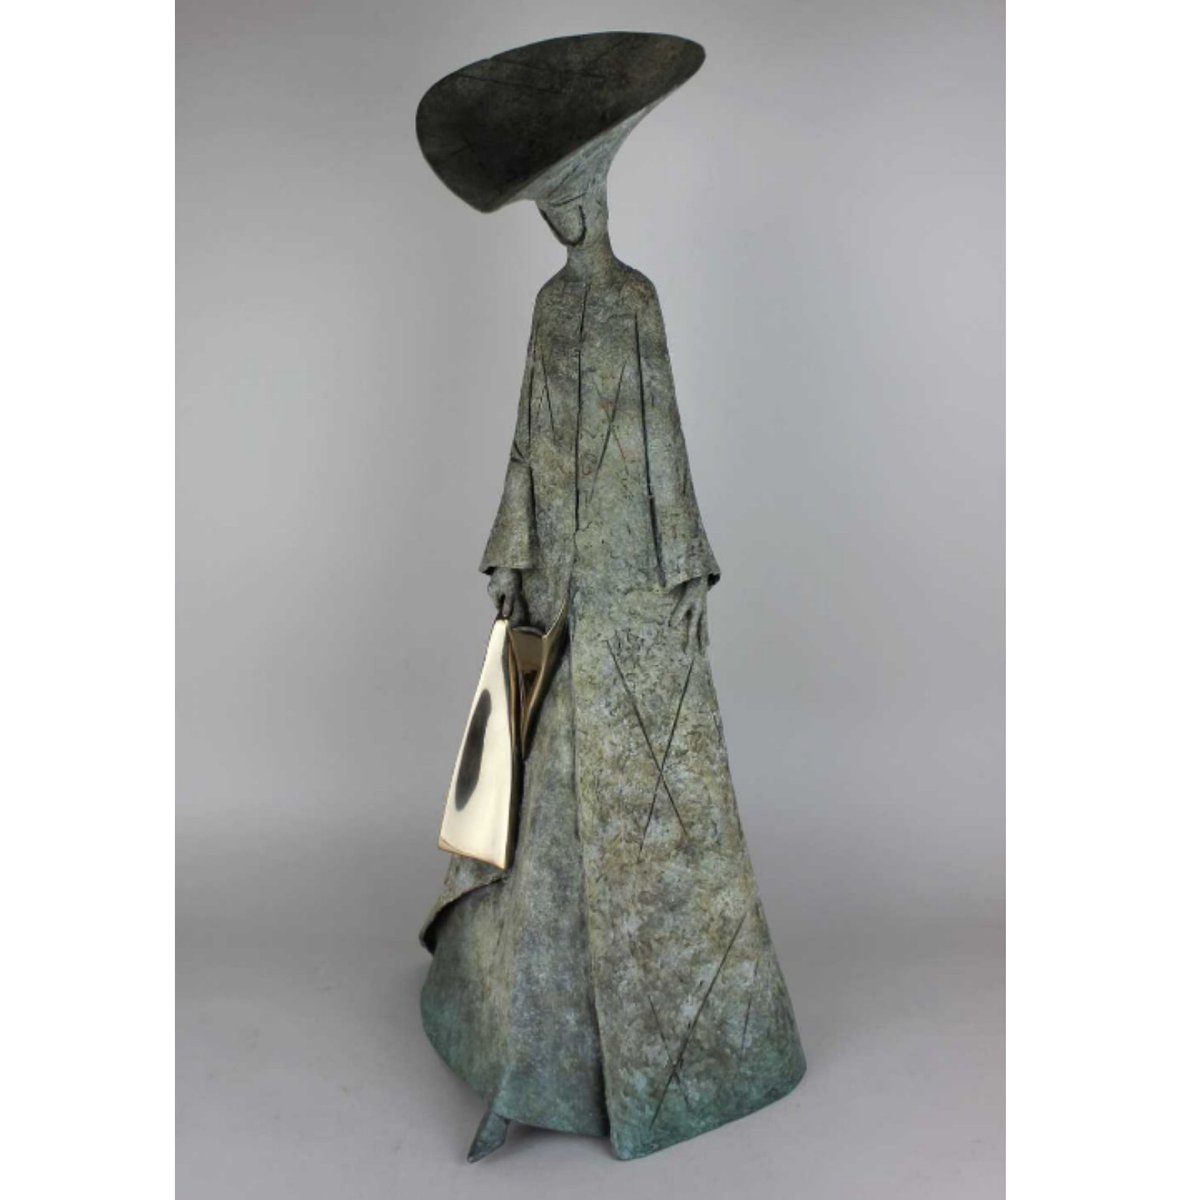 Today is the second day of viewing for our Selected Antiques & Fine Art Auction THURSDAY 14TH SEPTEMBER

henryadamsfineart.co.uk 

Lot 161 Philip Jackson (b 1944), Mistress of the Ca d'Oro, signed and numbered 7/8, bronze, 71cm high
Est. £10,000 - £12,000*
#philipjackson